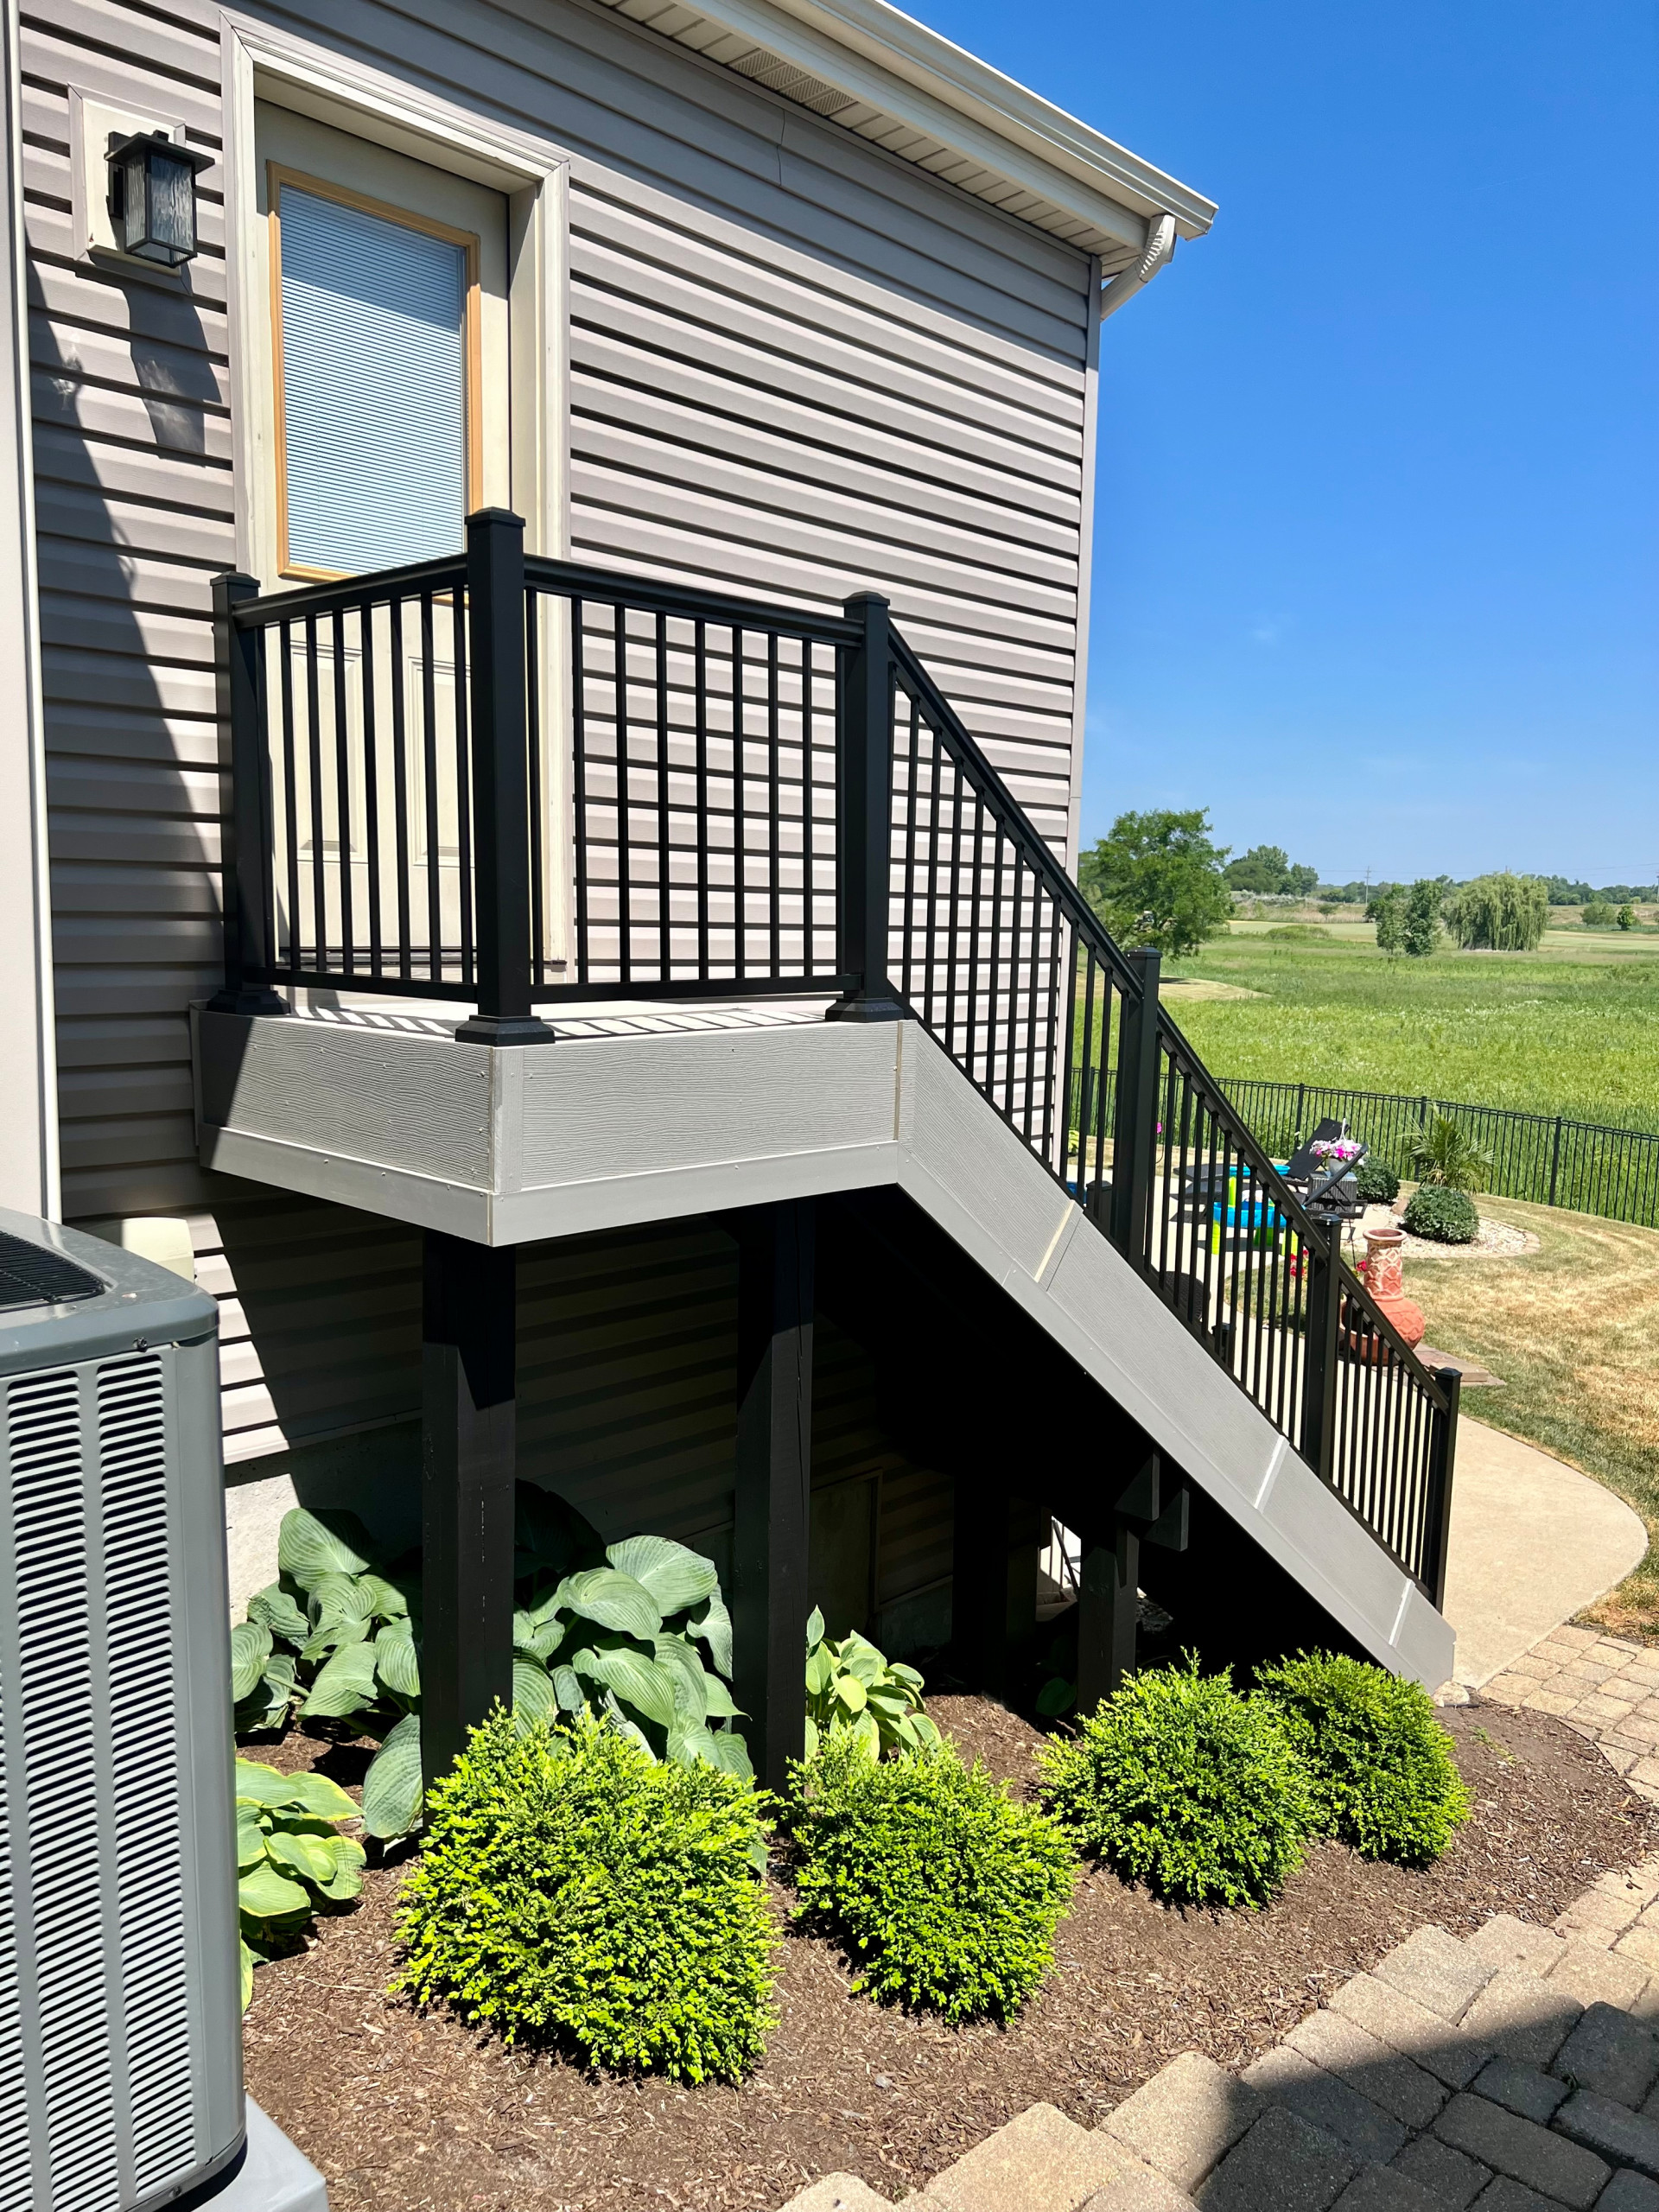 Exterior Staircase & Deck Addition